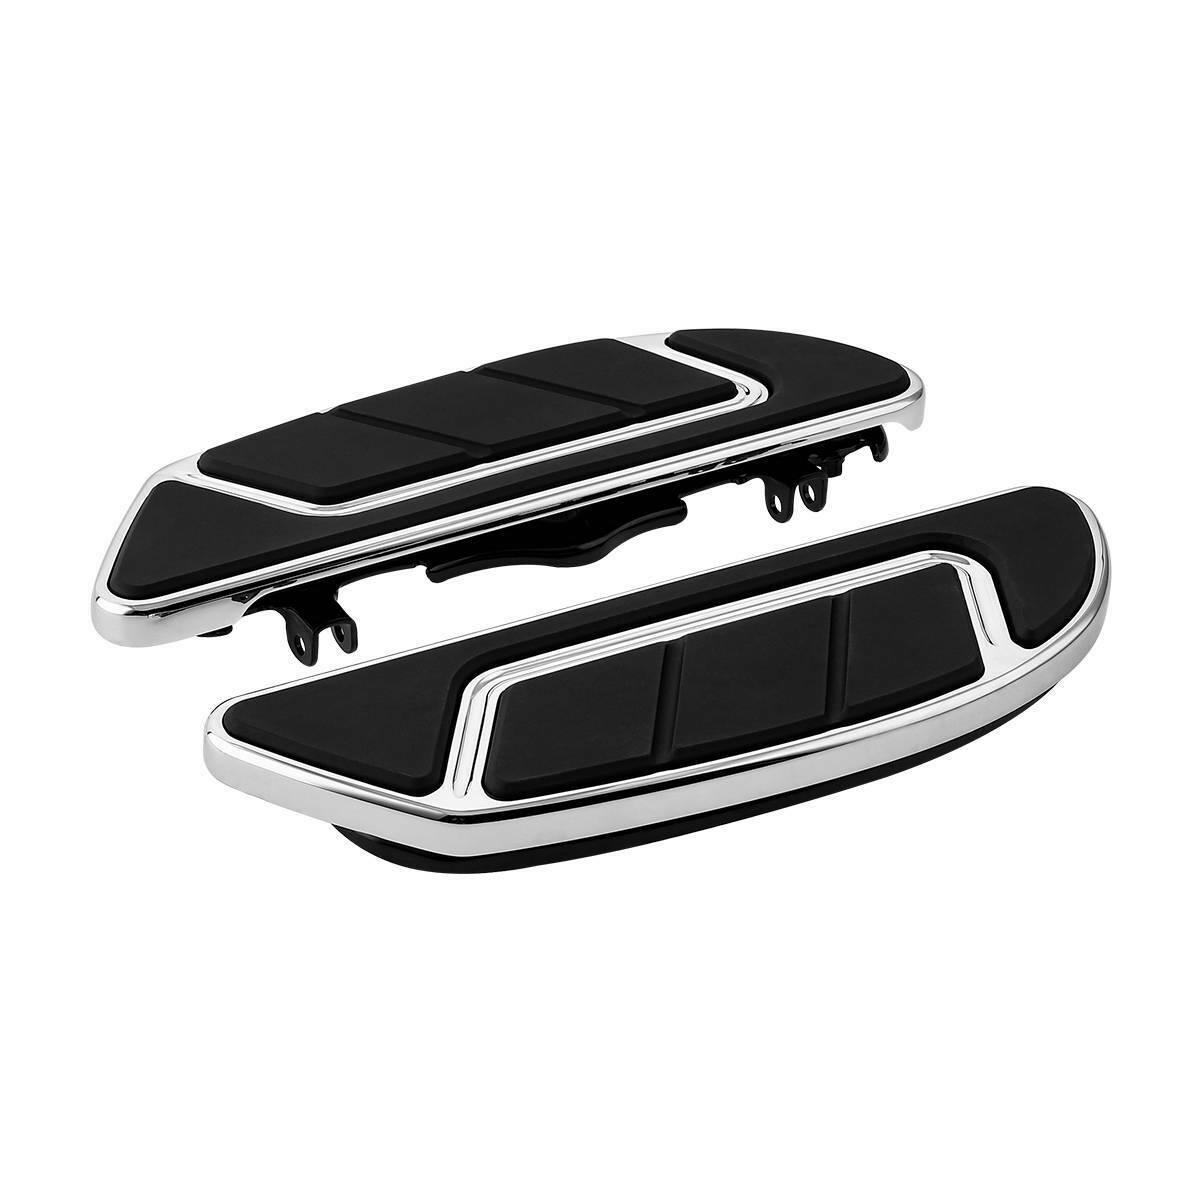 Airflow Driver Floorboard Fit For Harley Touring Road King 14-21 Softail 86-17 - Moto Life Products